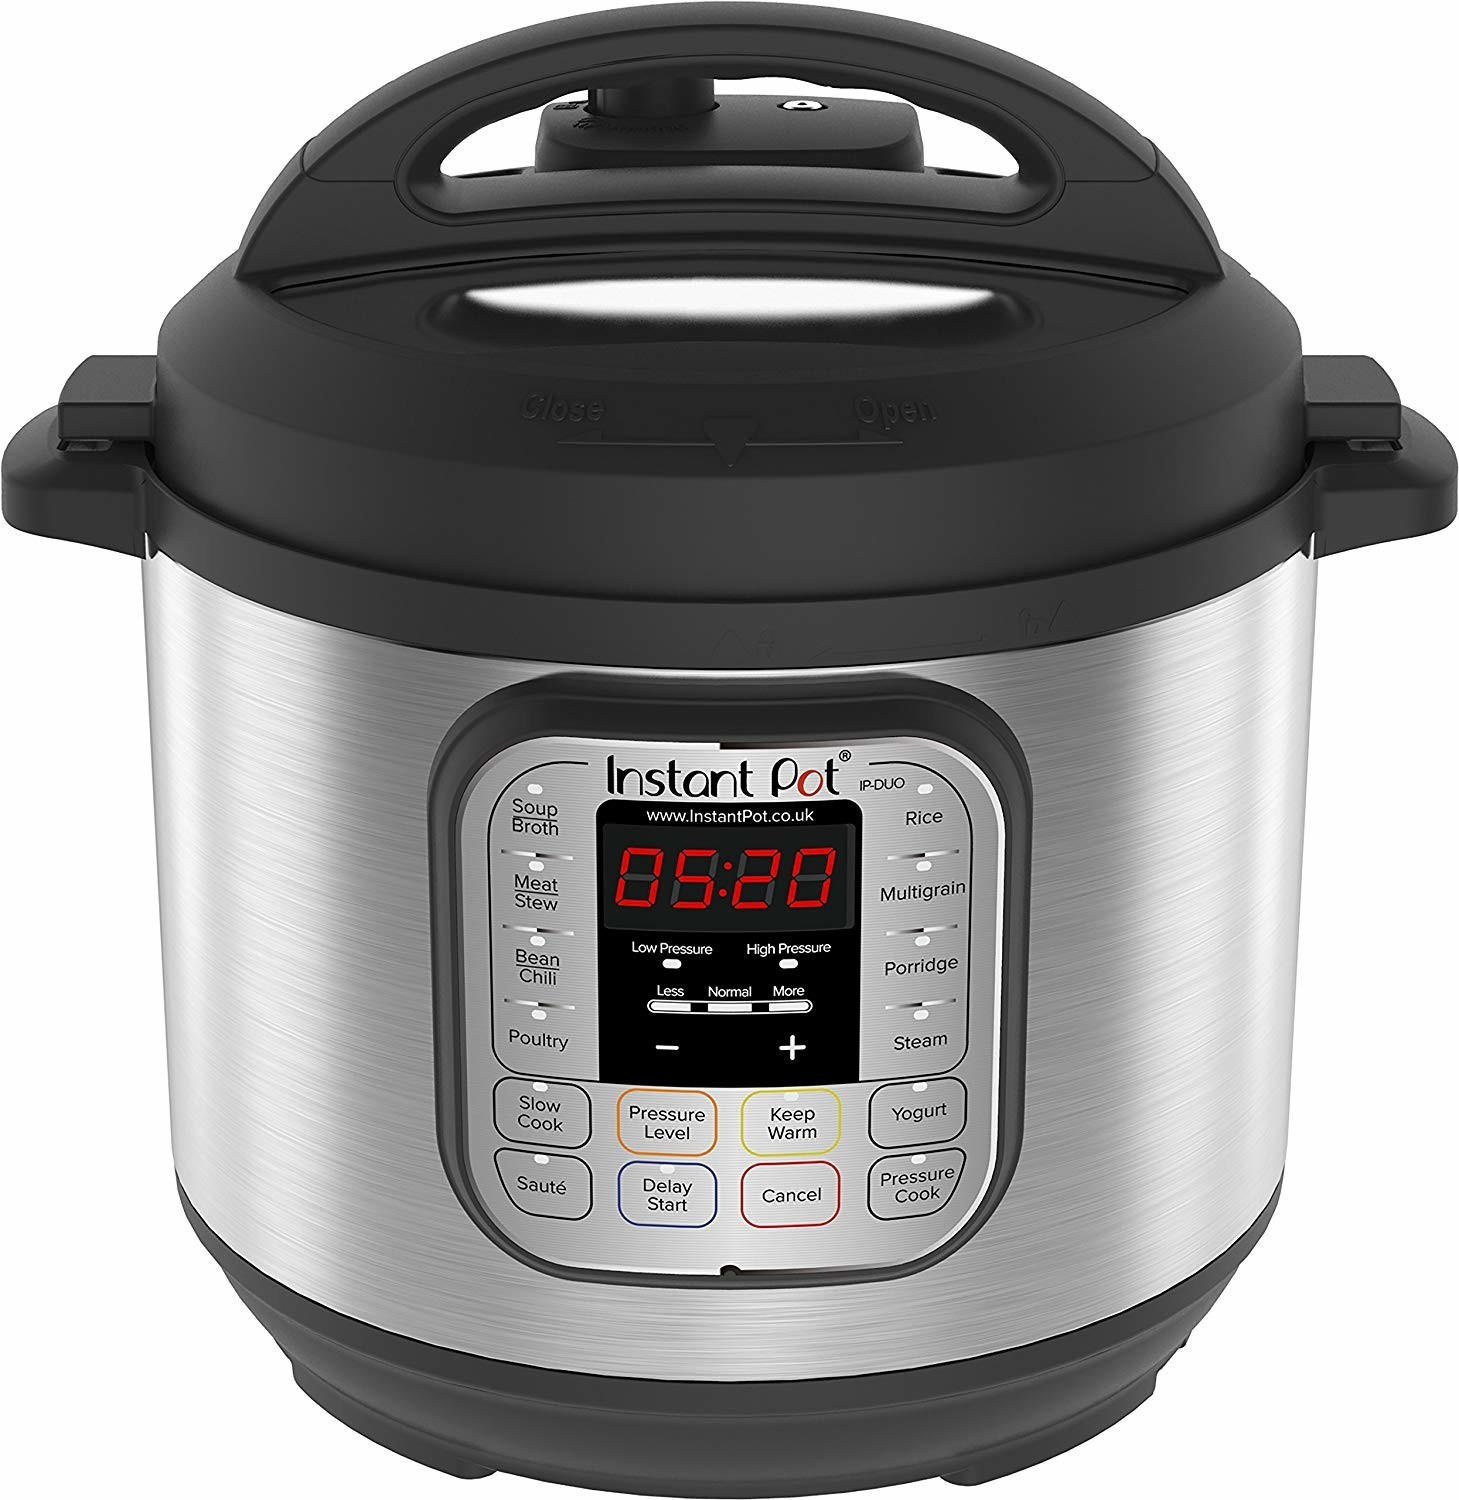 Instant Pot Duo V2 7-in-1 Electric Pressure Cooker